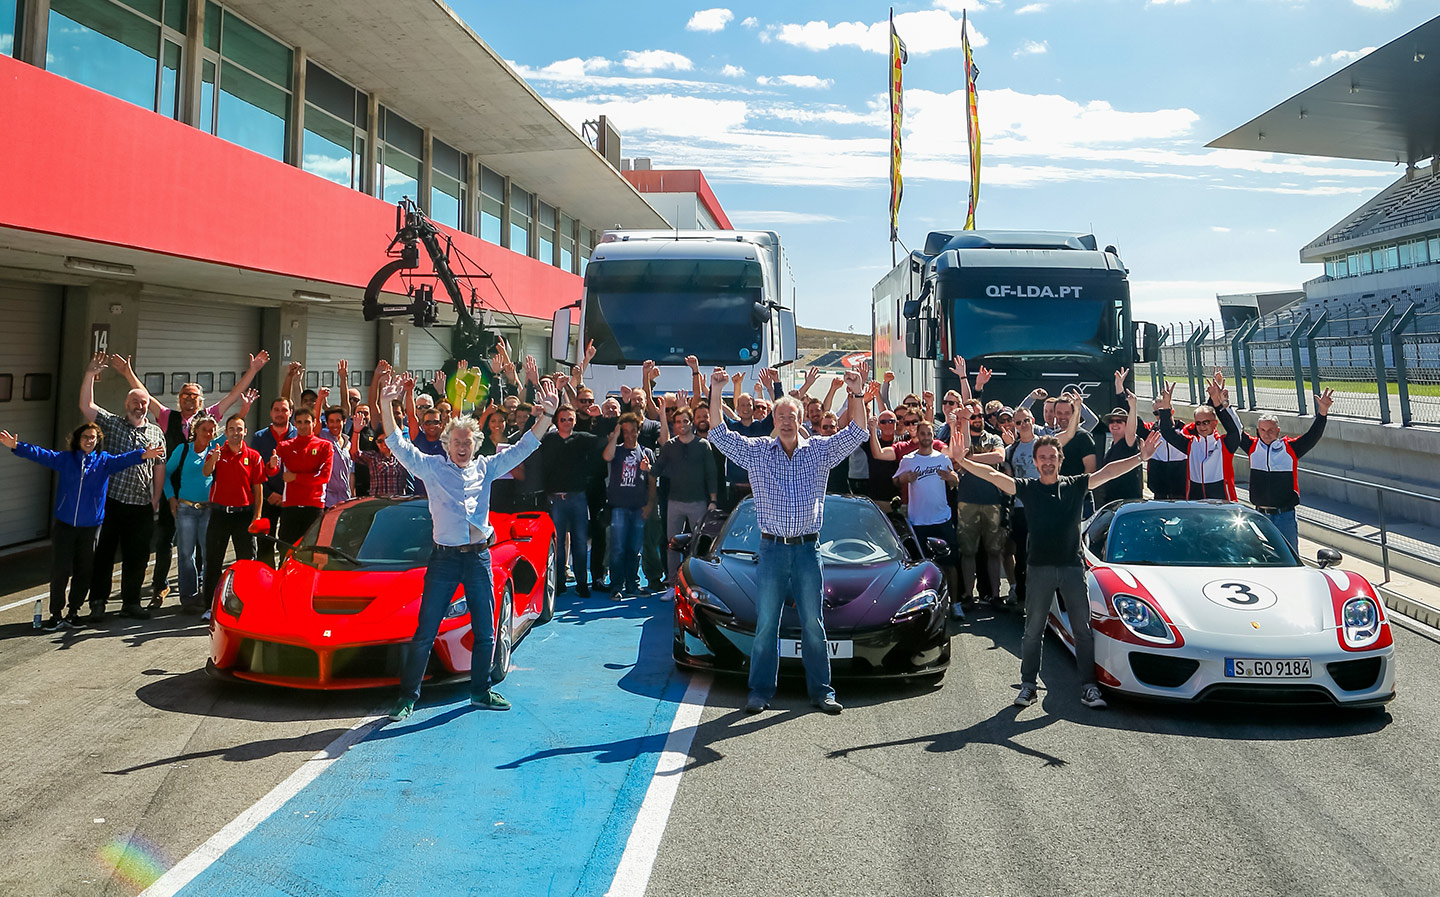 A grand photo gallery of The Grand Tour season one